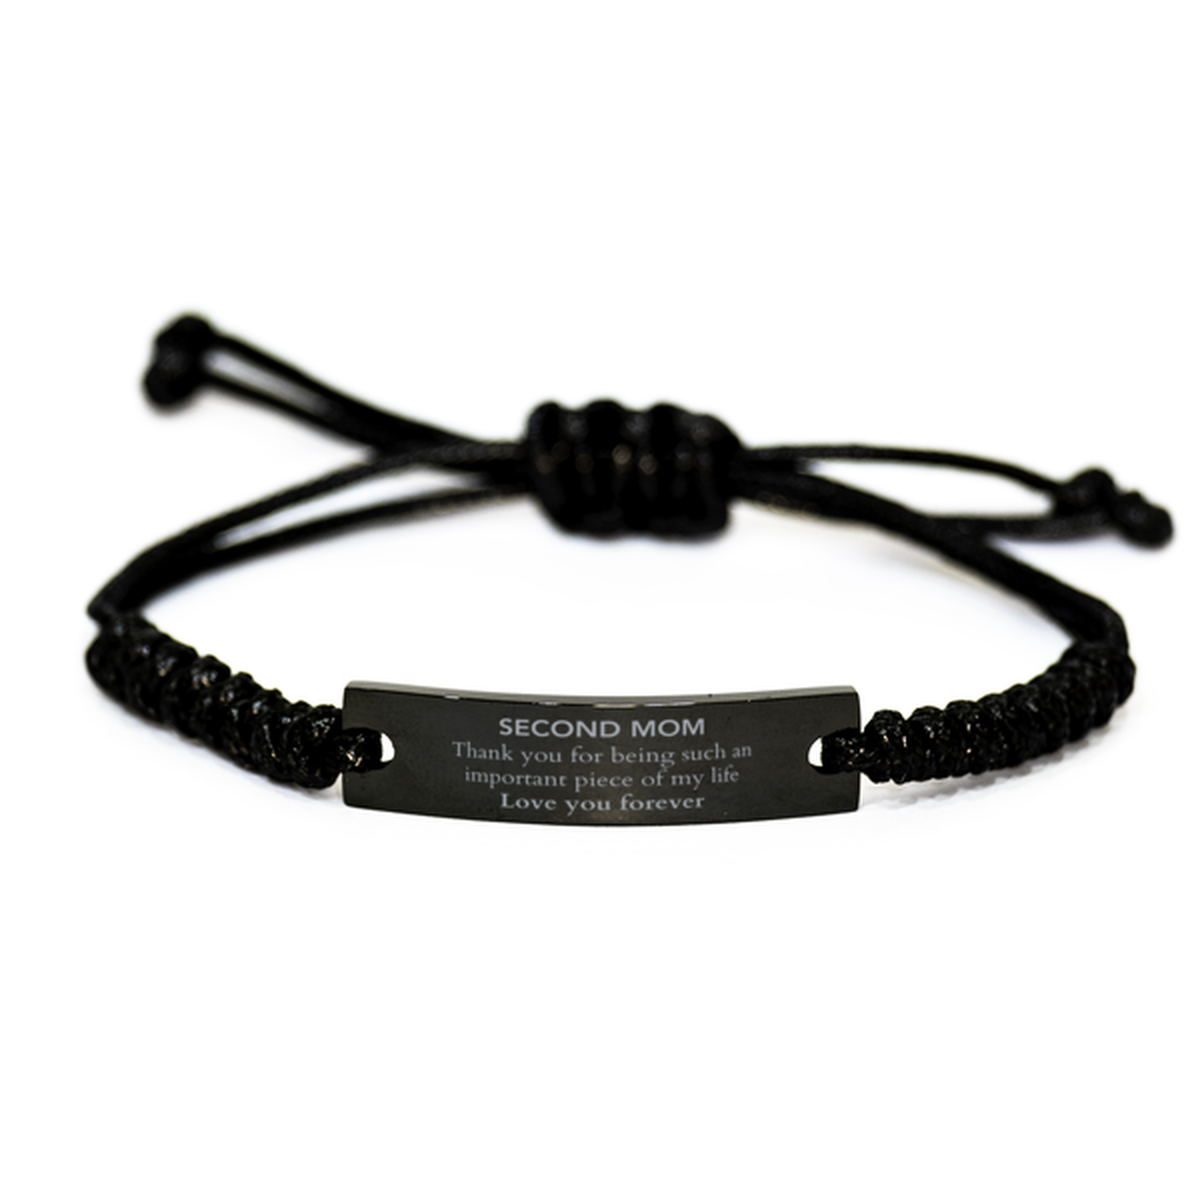 Appropriate Second Mom Black Rope Bracelet Epic Birthday Gifts for Second Mom Thank you for being such an important piece of my life Second Mom Christmas Mothers Fathers Day